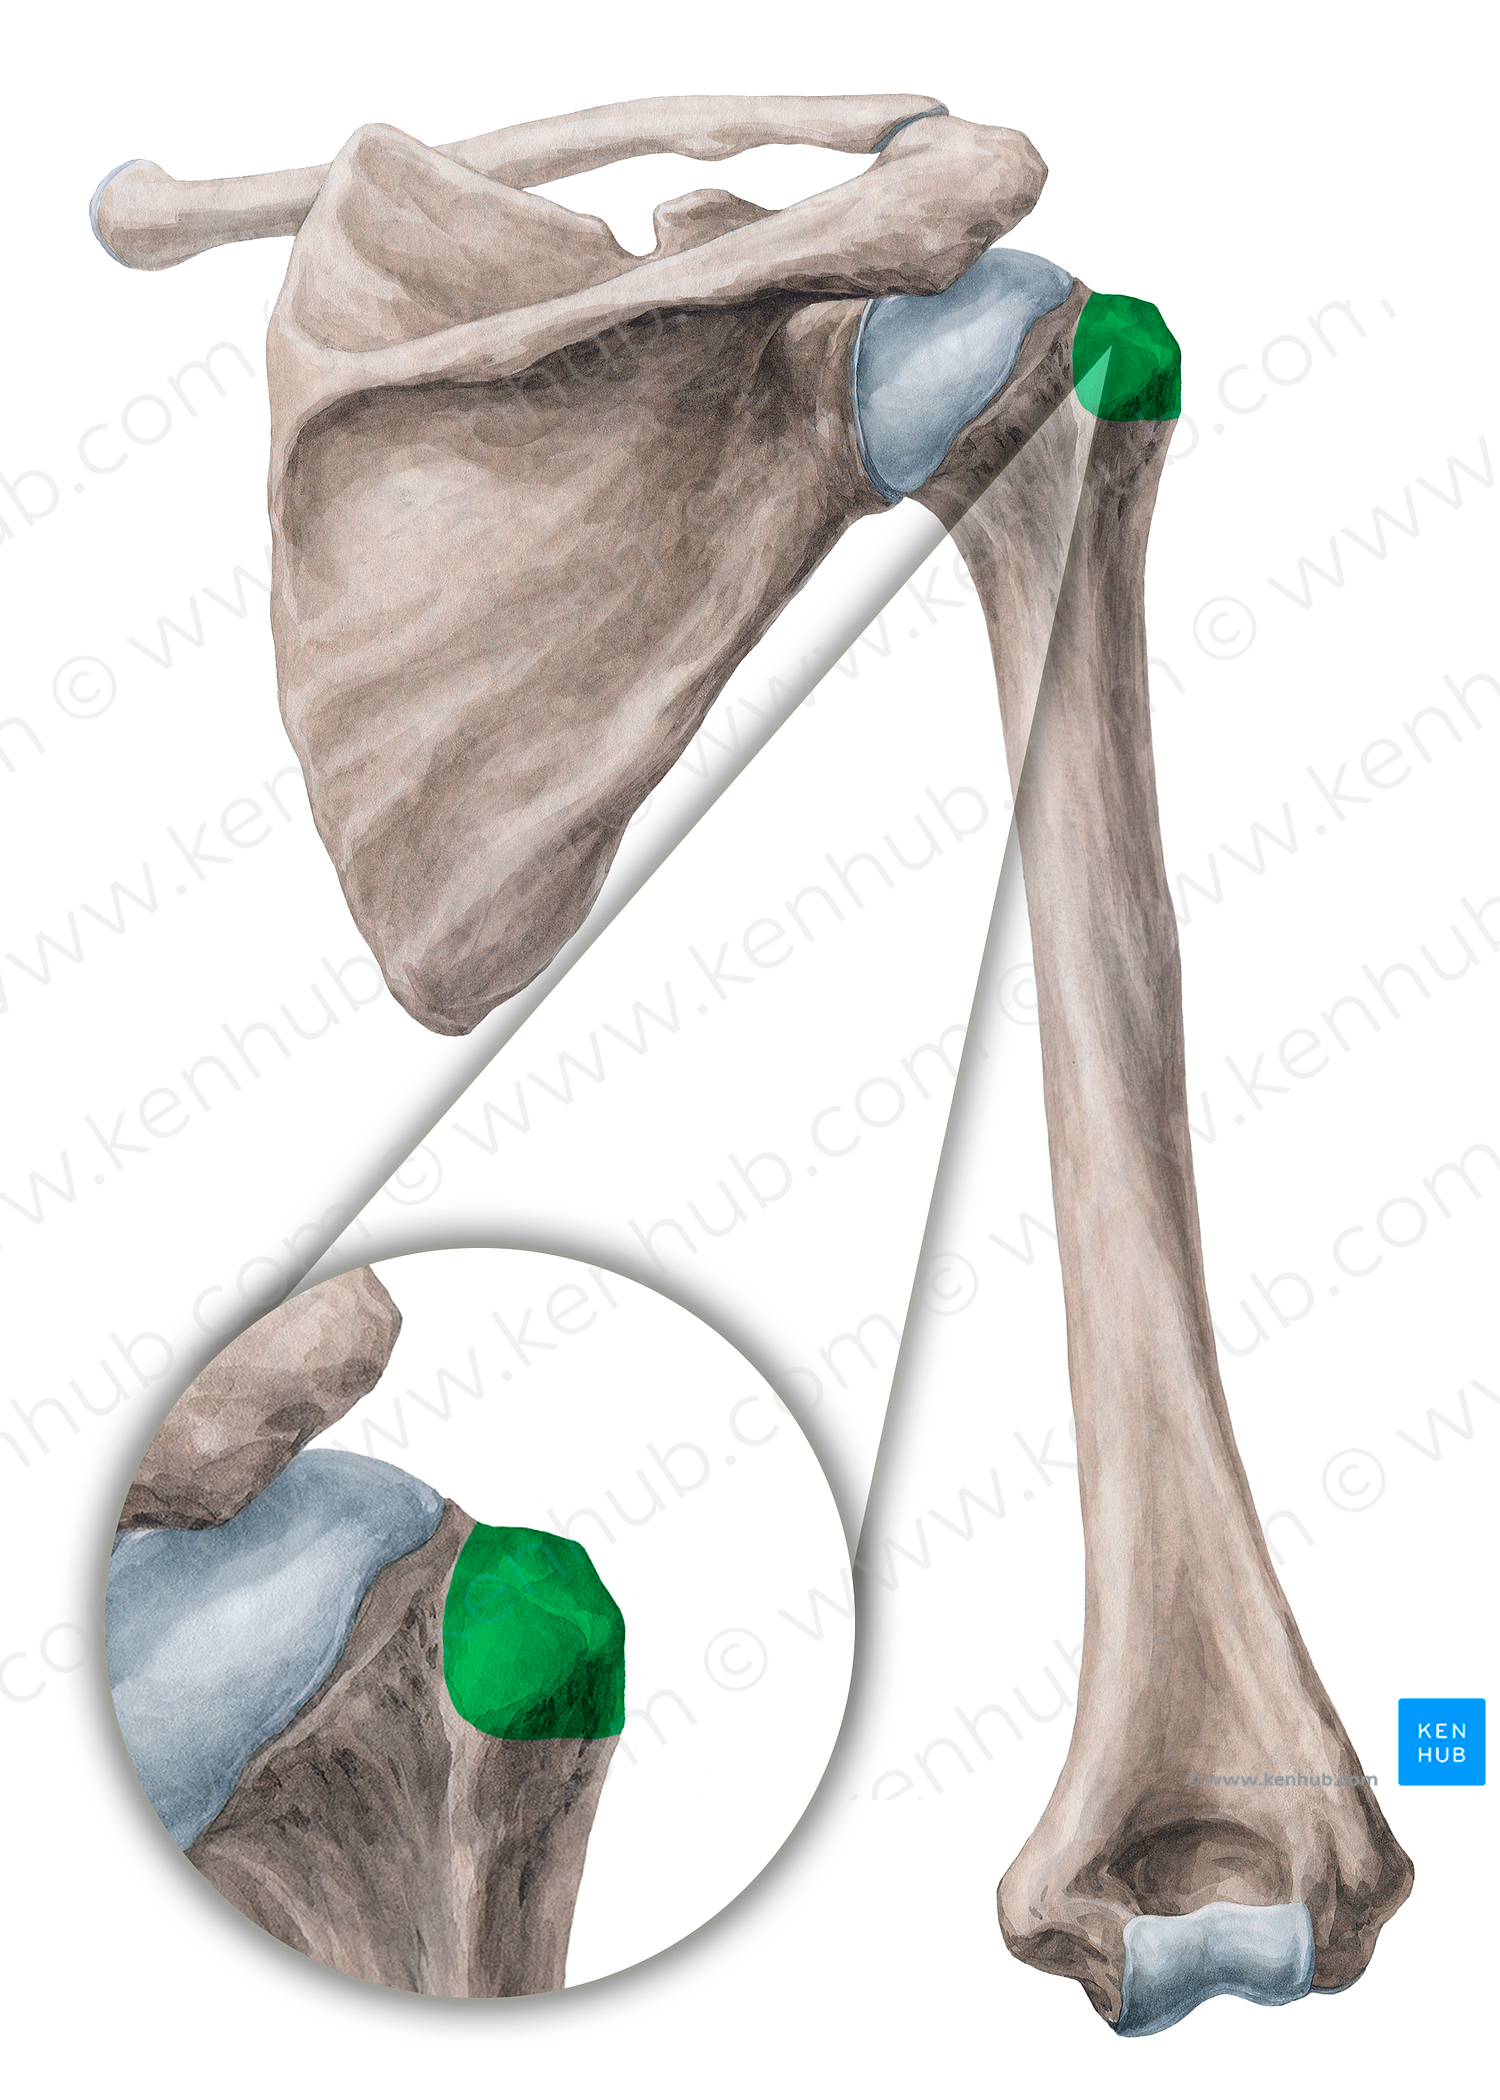 Greater tubercle of humerus (#9732)